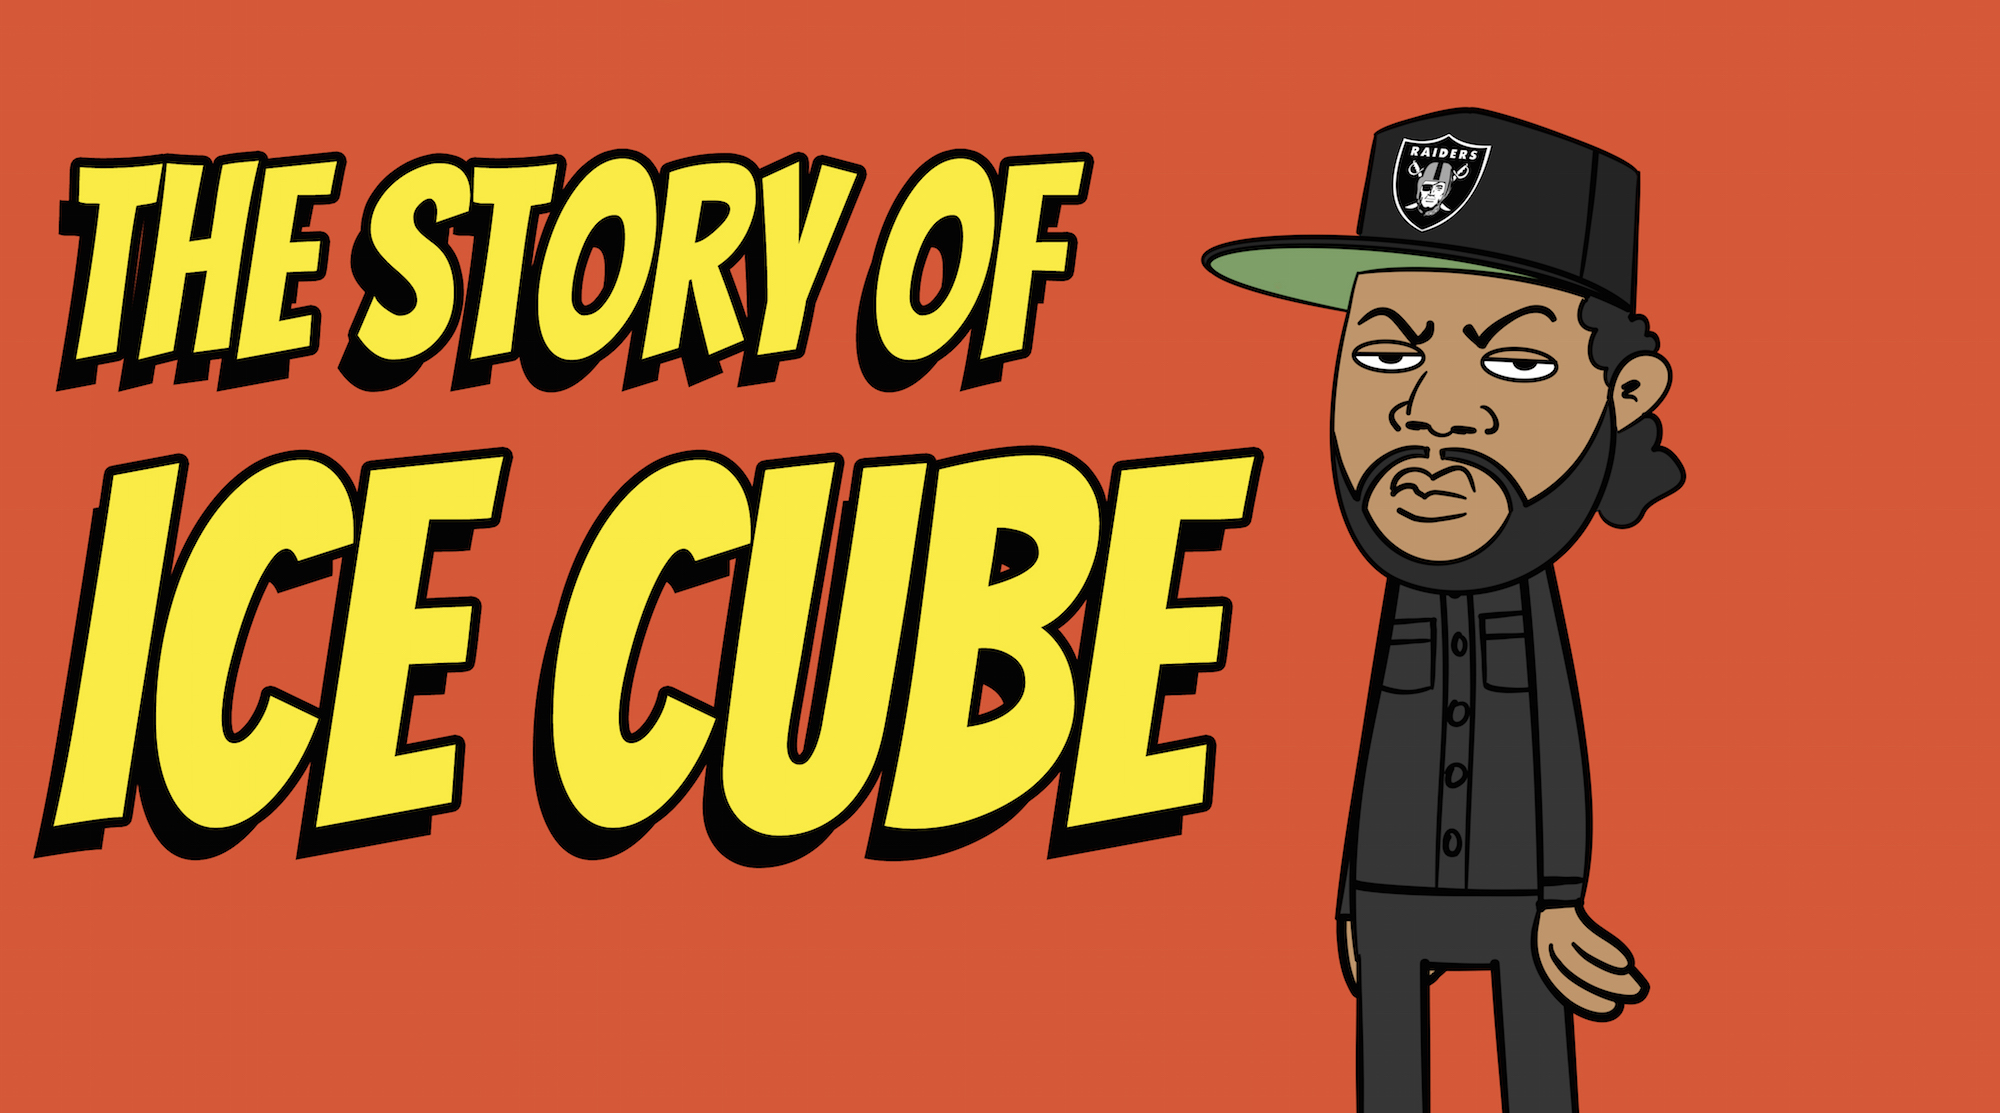 Ice cube you know. Ice Cube logo. Ice Cube it was a good Day. Lars Ratz.